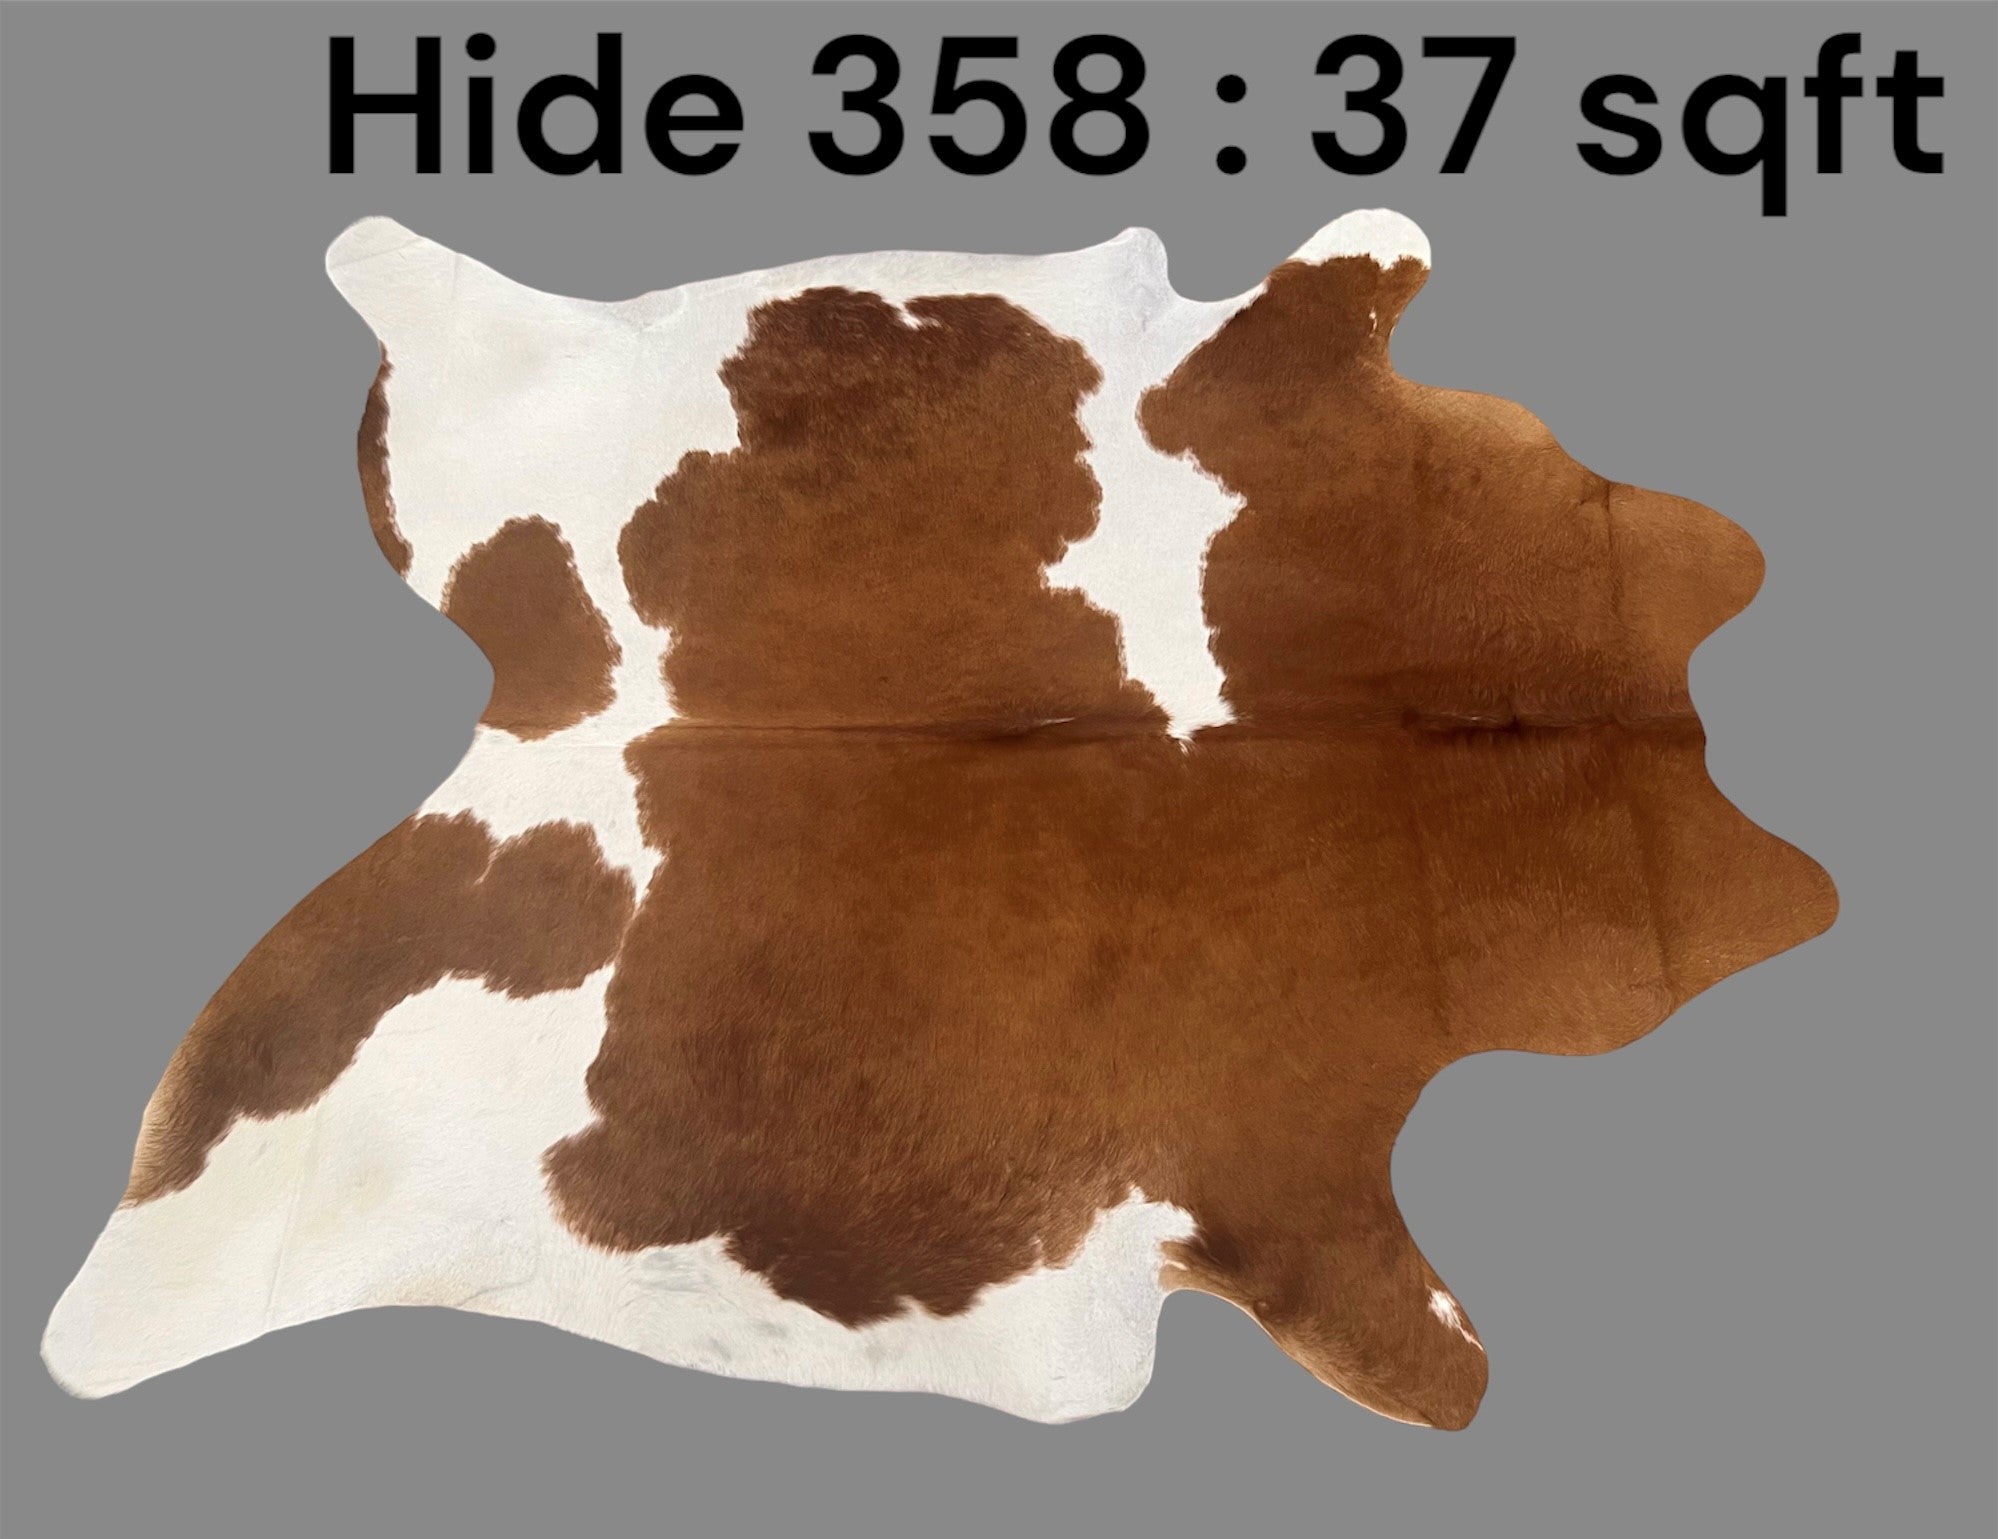 Natural Hair On Cow Hide : This Hide Is Perfect For Wall Hanging, Leather Rugs, Leather Upholstery & Leather Accessories. (Hide358)